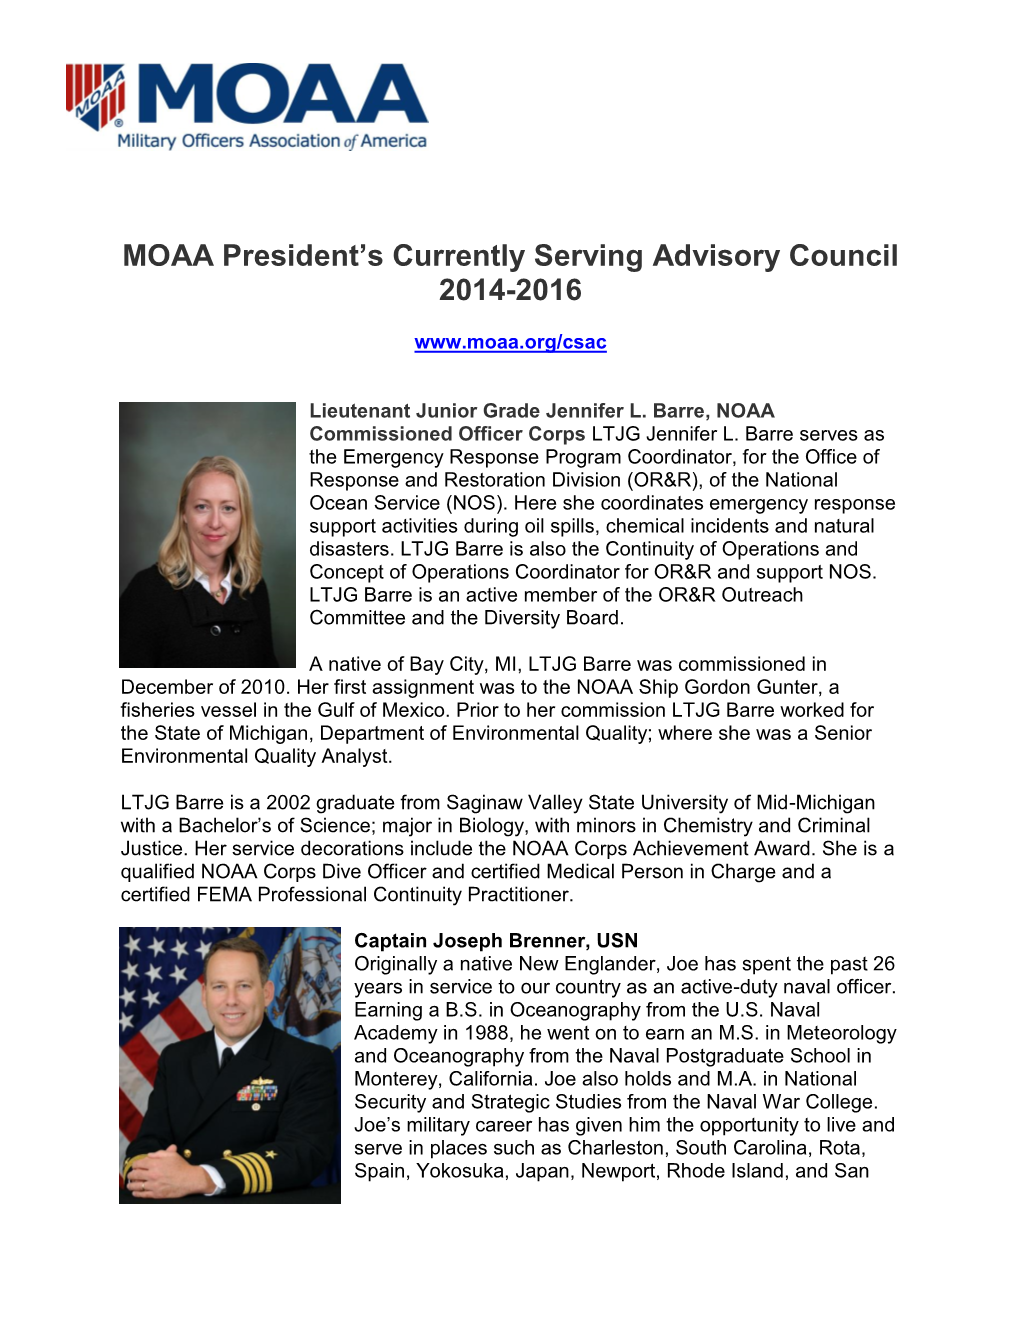 MOAA President's Currently Serving Advisory Council 2014-2016